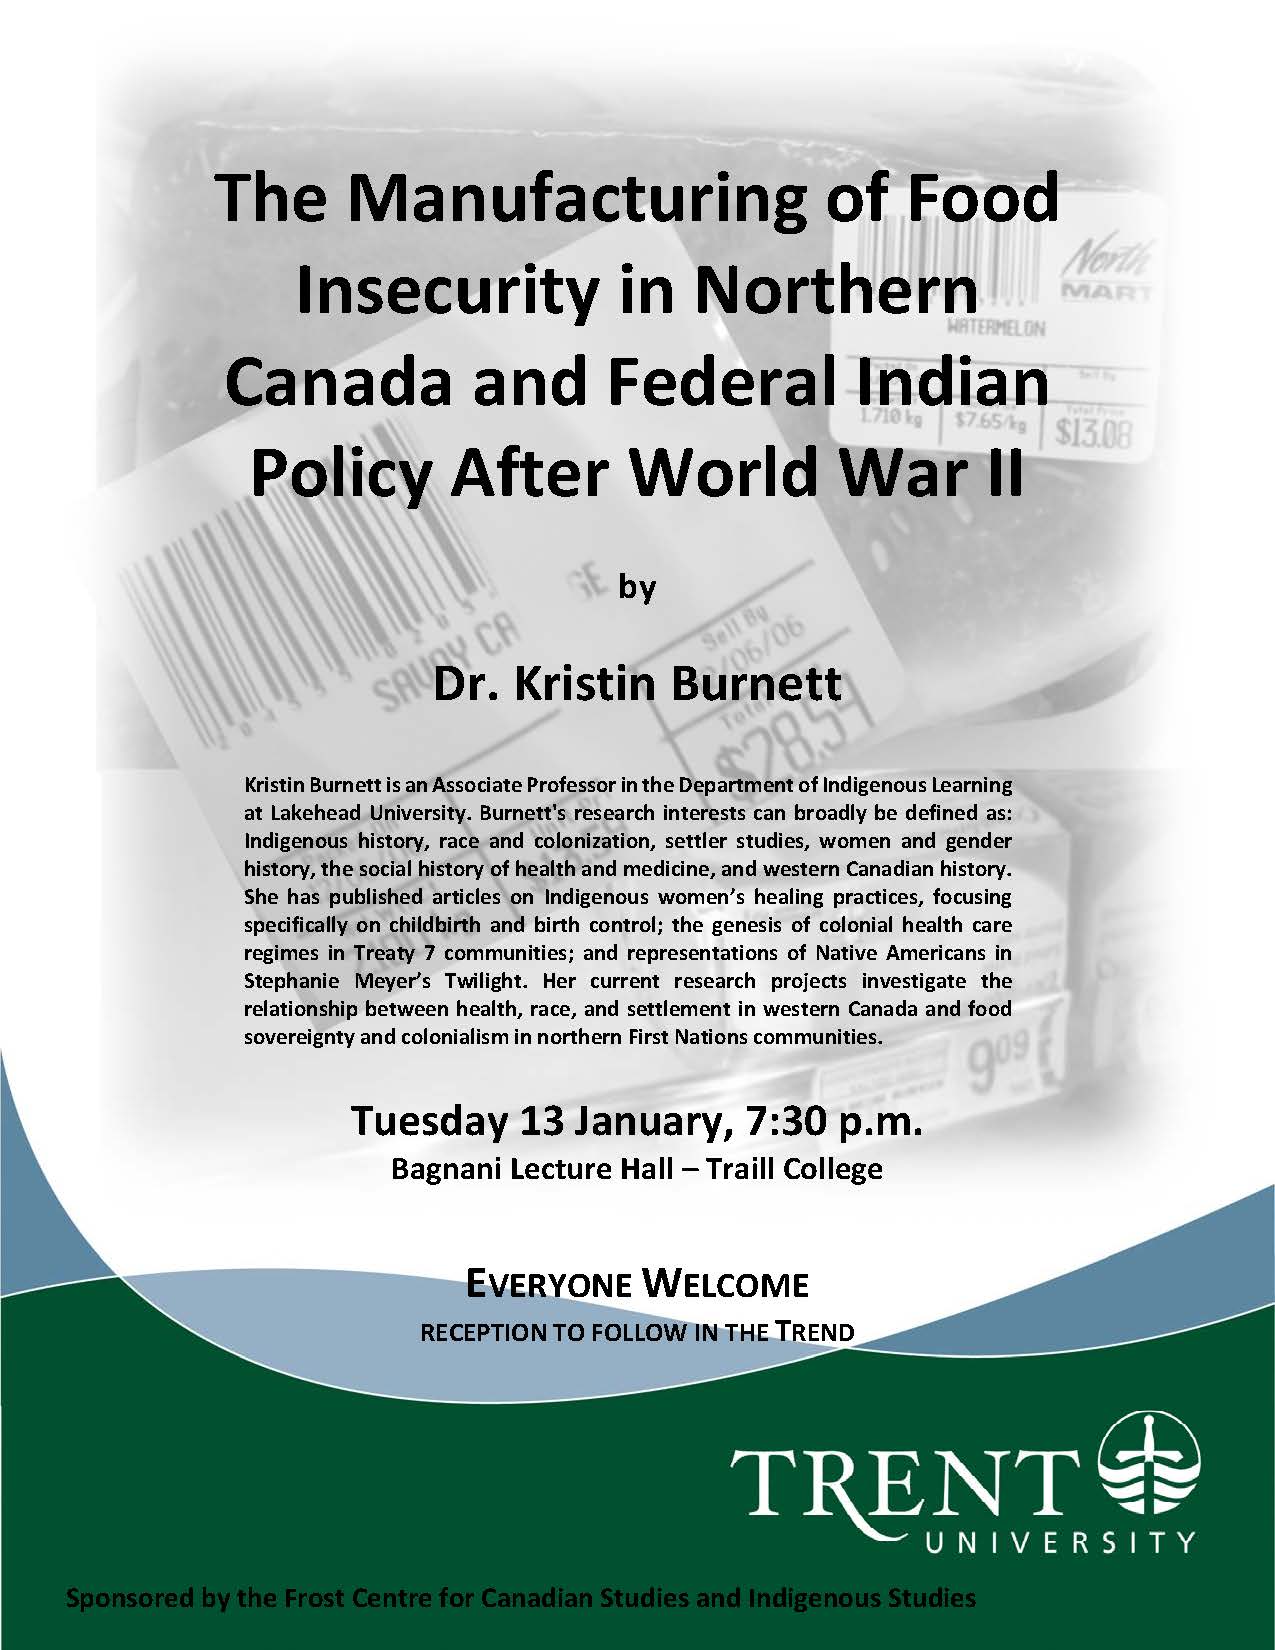 2015 January 13 "The Manufacturing of Food Insecurity in Northern Canada and Federal Indian Policy After World War II" with Kristin Burnett